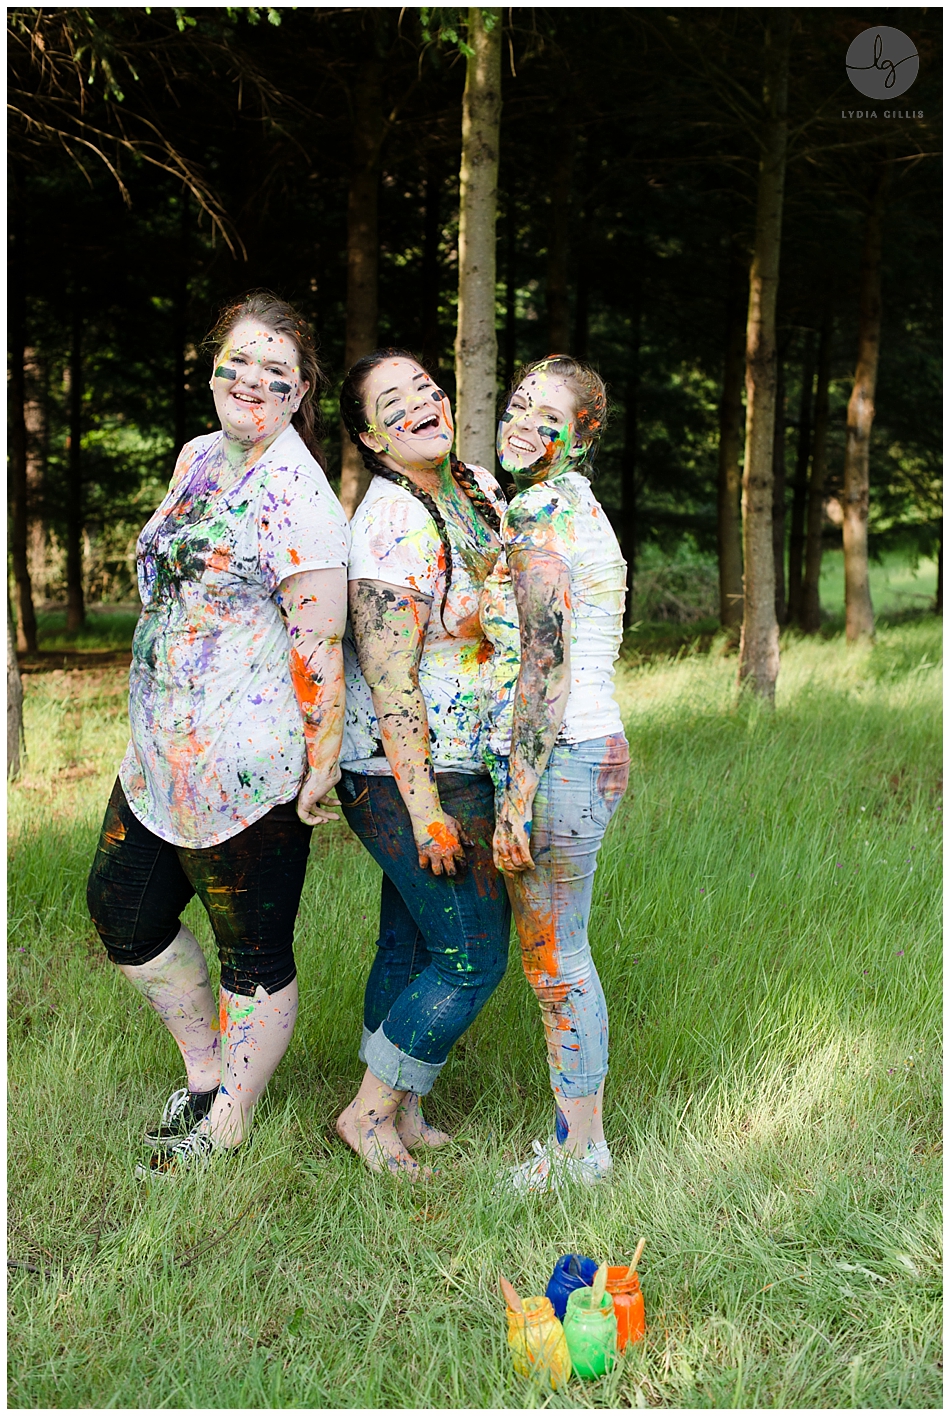 Paint fight photos in Eugene